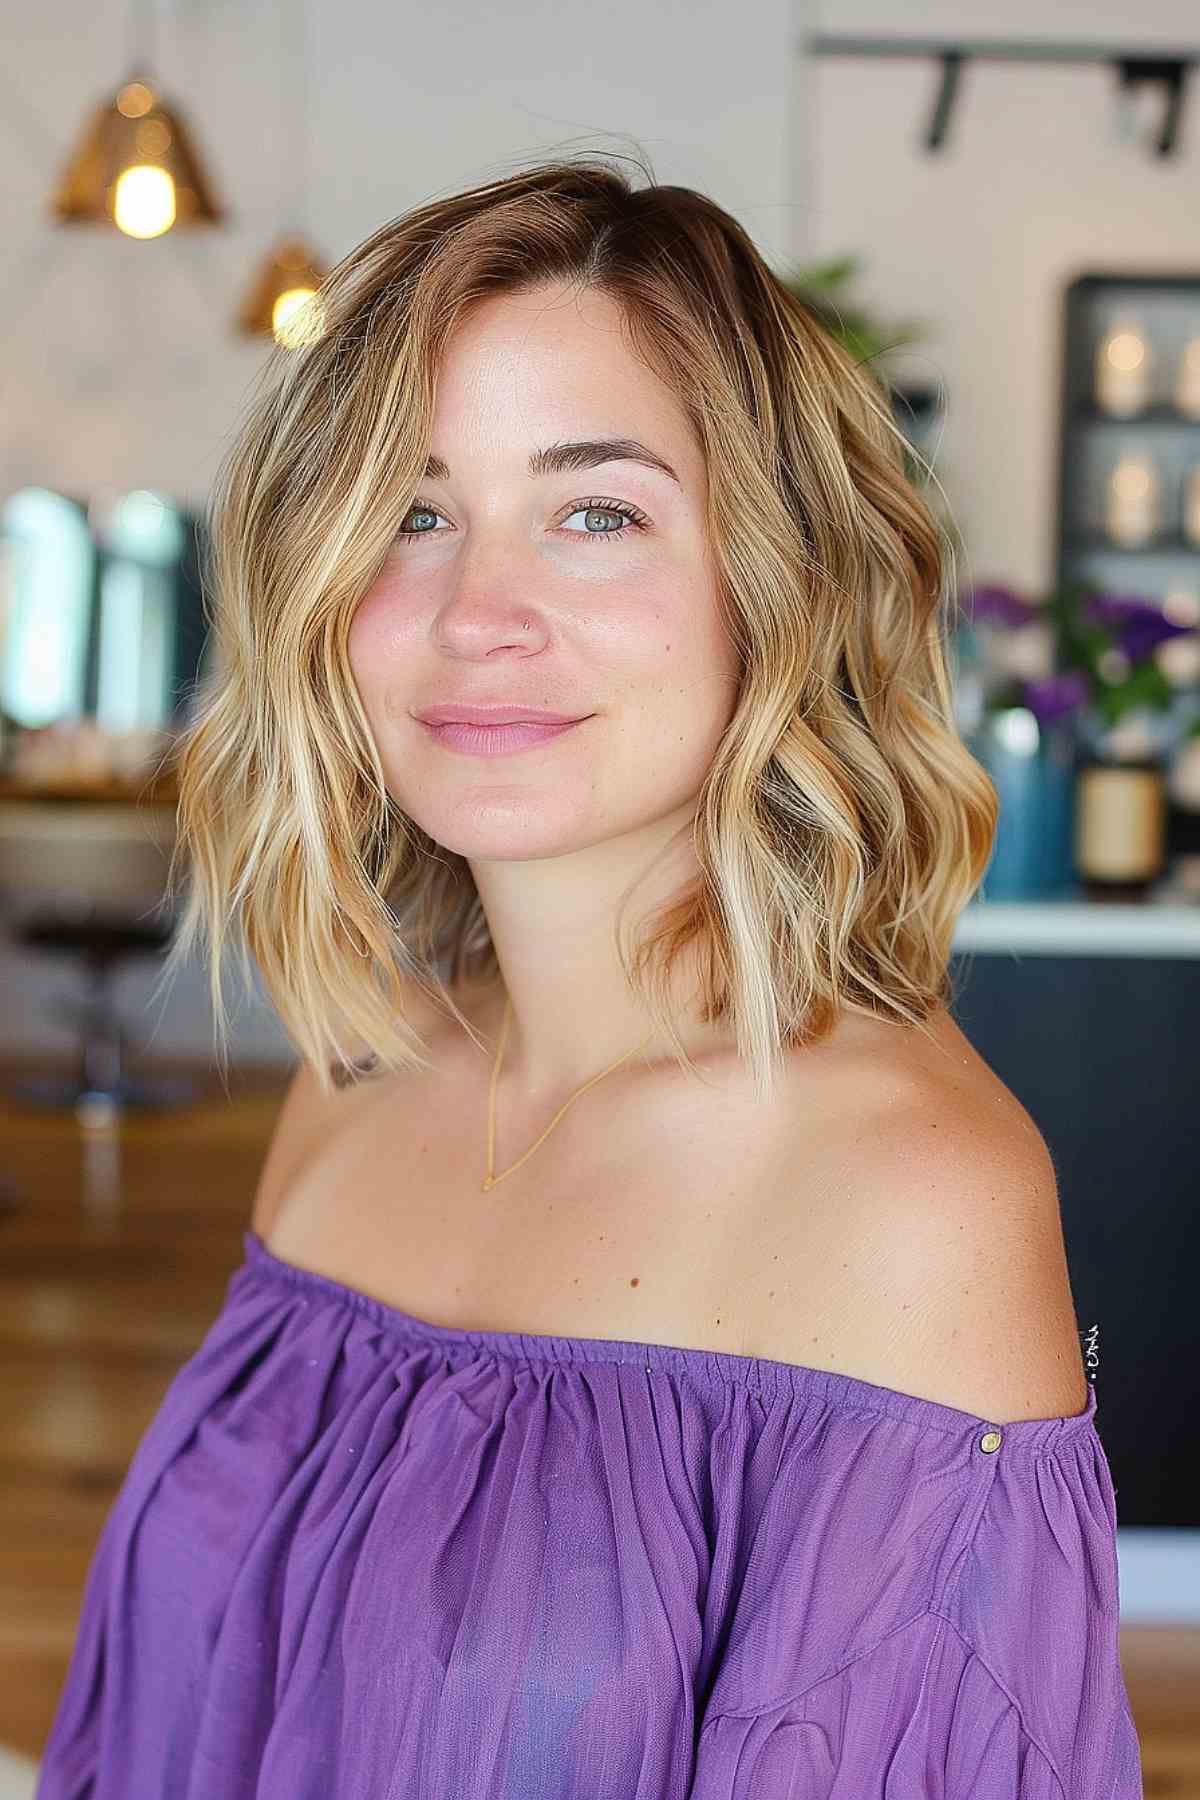 Shoulder-length beachy waves party hairstyle for a relaxed and chic look.